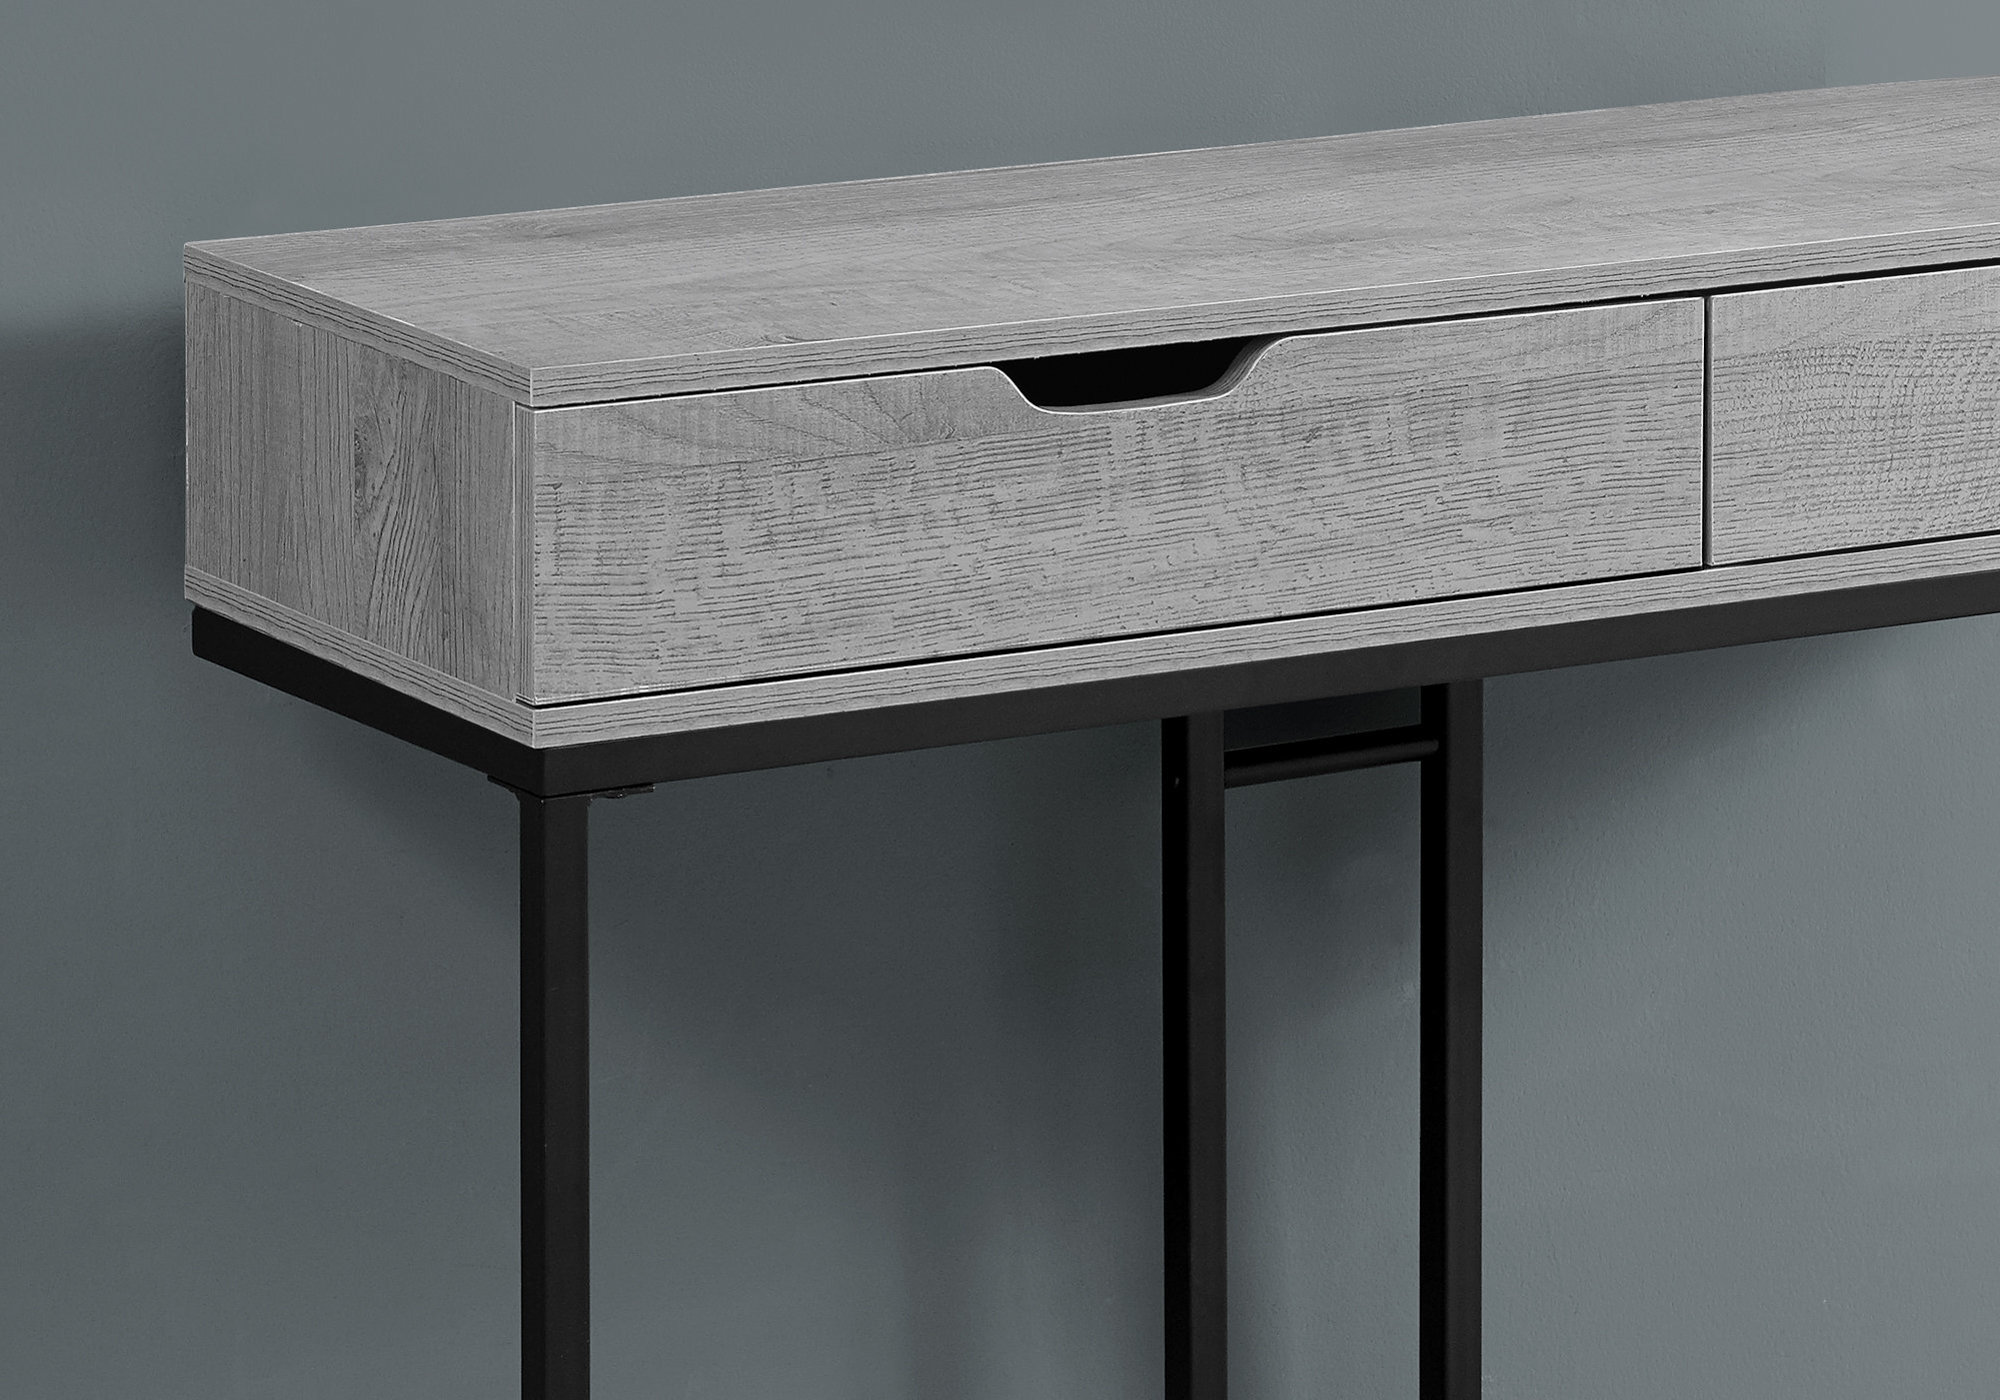 ACCENT TABLE - 42"L / GREY/ BLACK METAL HALL CONSOLE